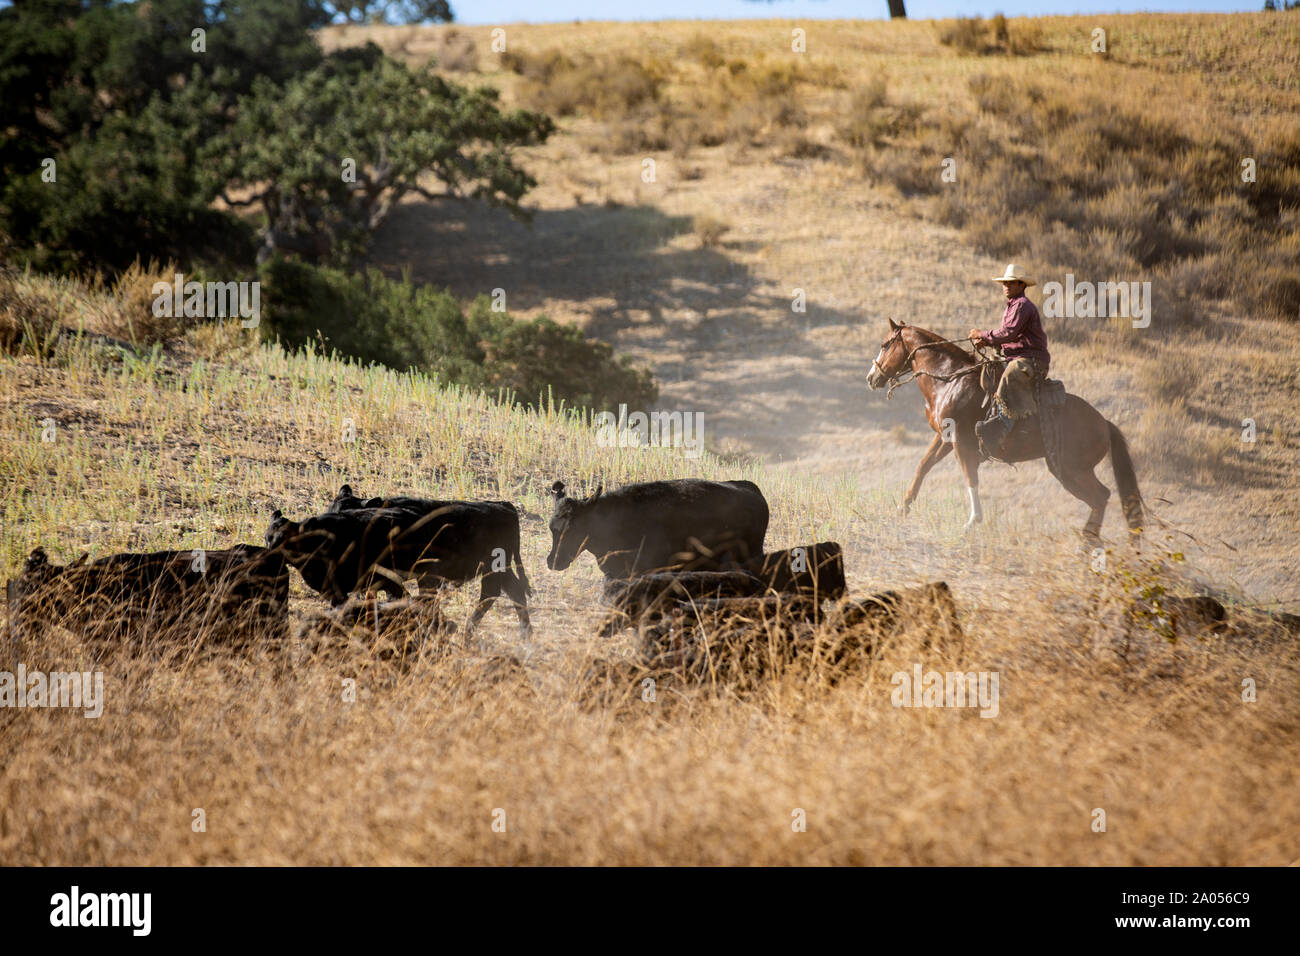 Page 3 - Pferd Reiten High Resolution Stock Photography and Images - Alamy